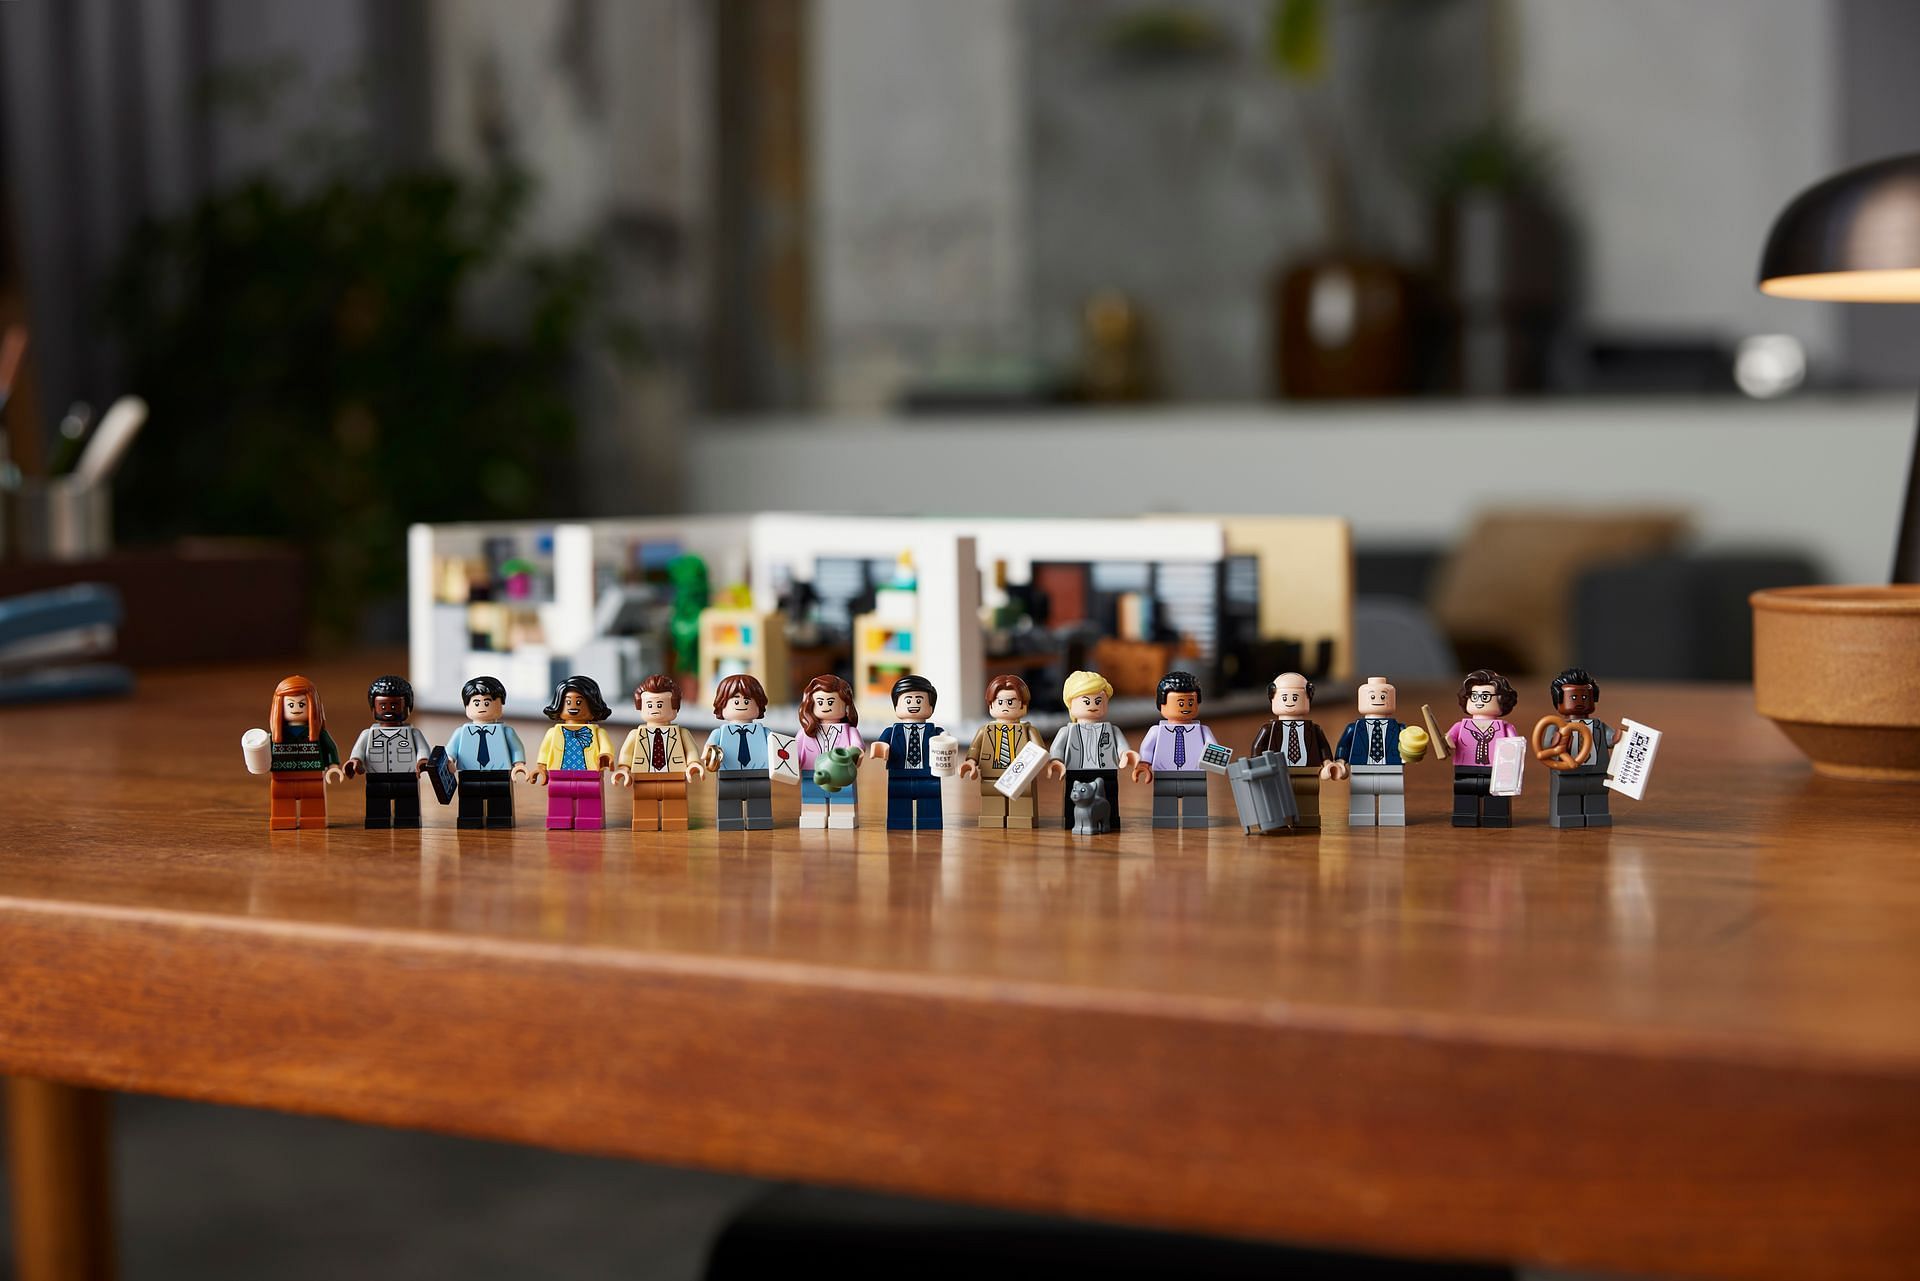 The prop accessories that comes with the mini figures (Image via The Lego Group)